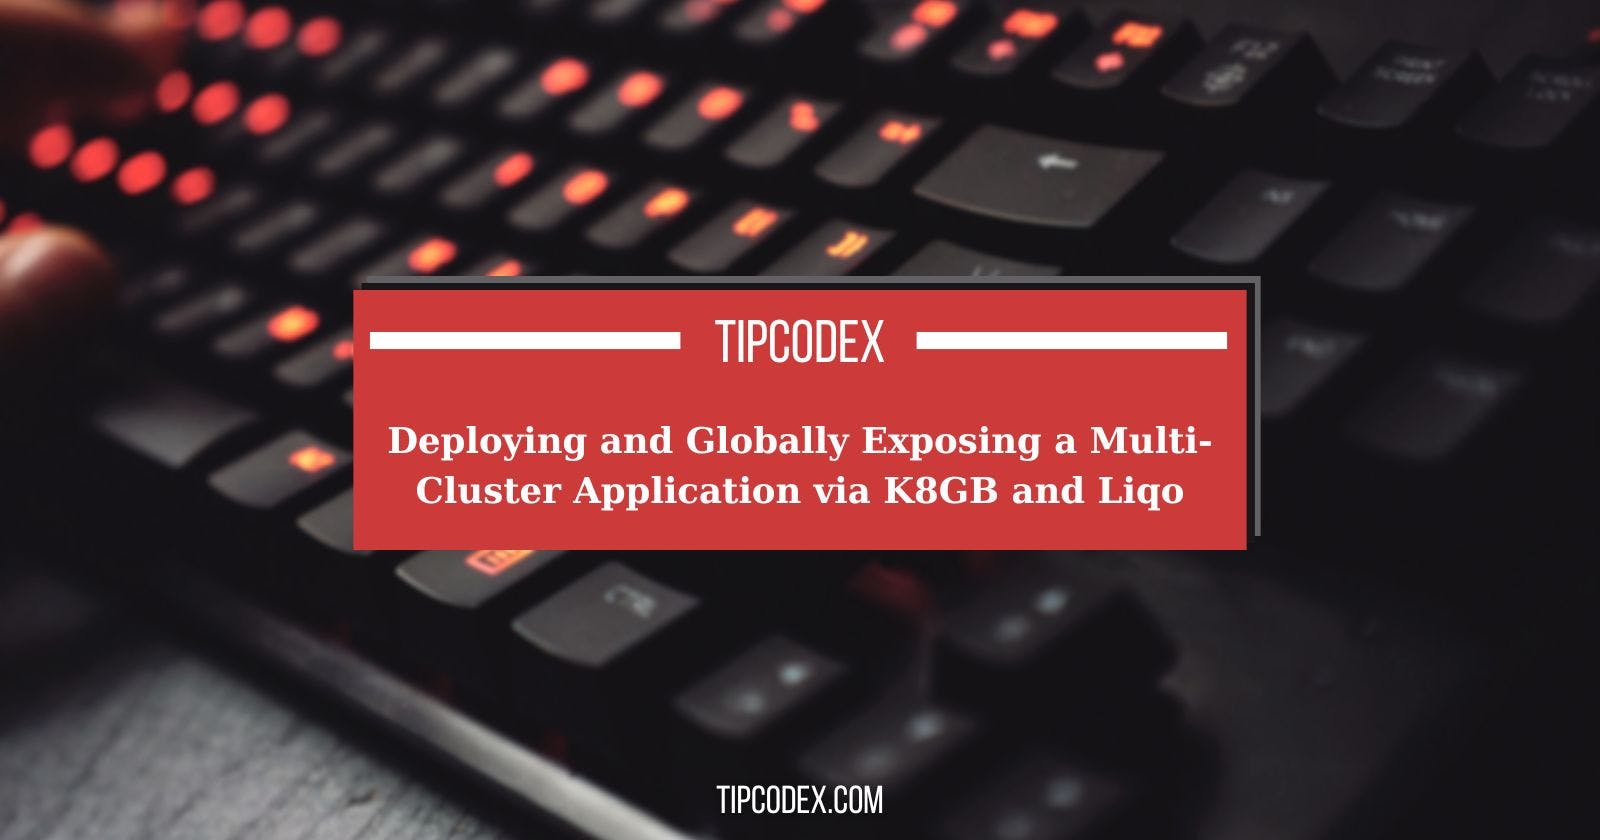 Deploying and Globally Exposing a Multi-Cluster Application via K8GB and Liqo